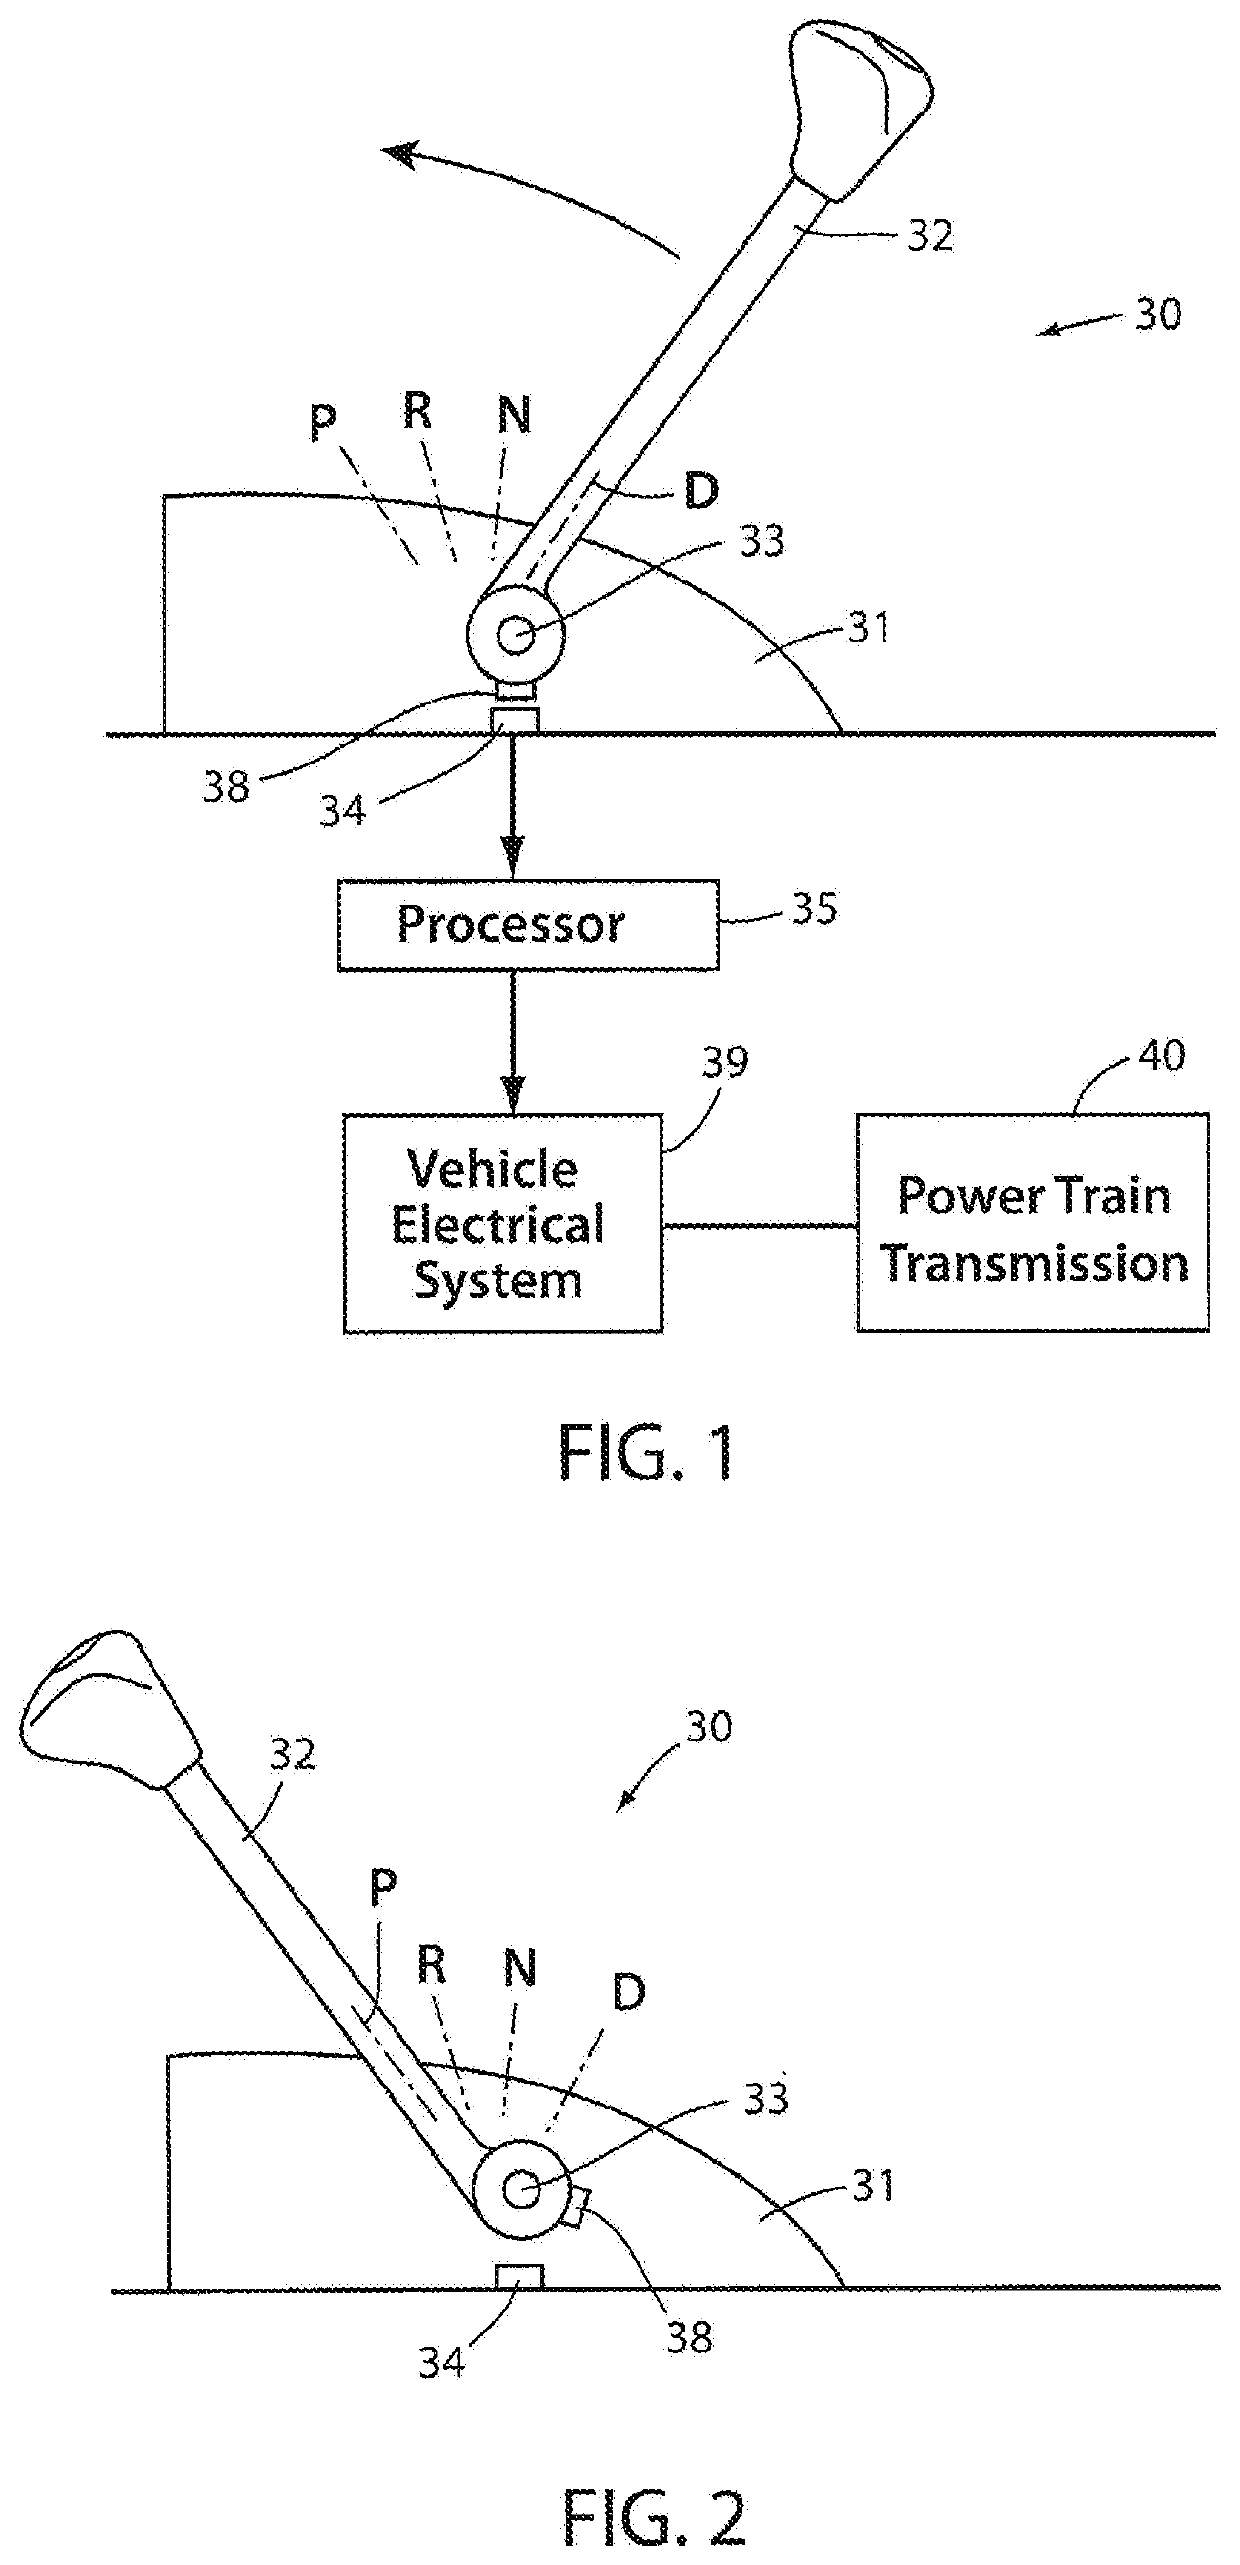 Transmission shifter with trained gear position set points